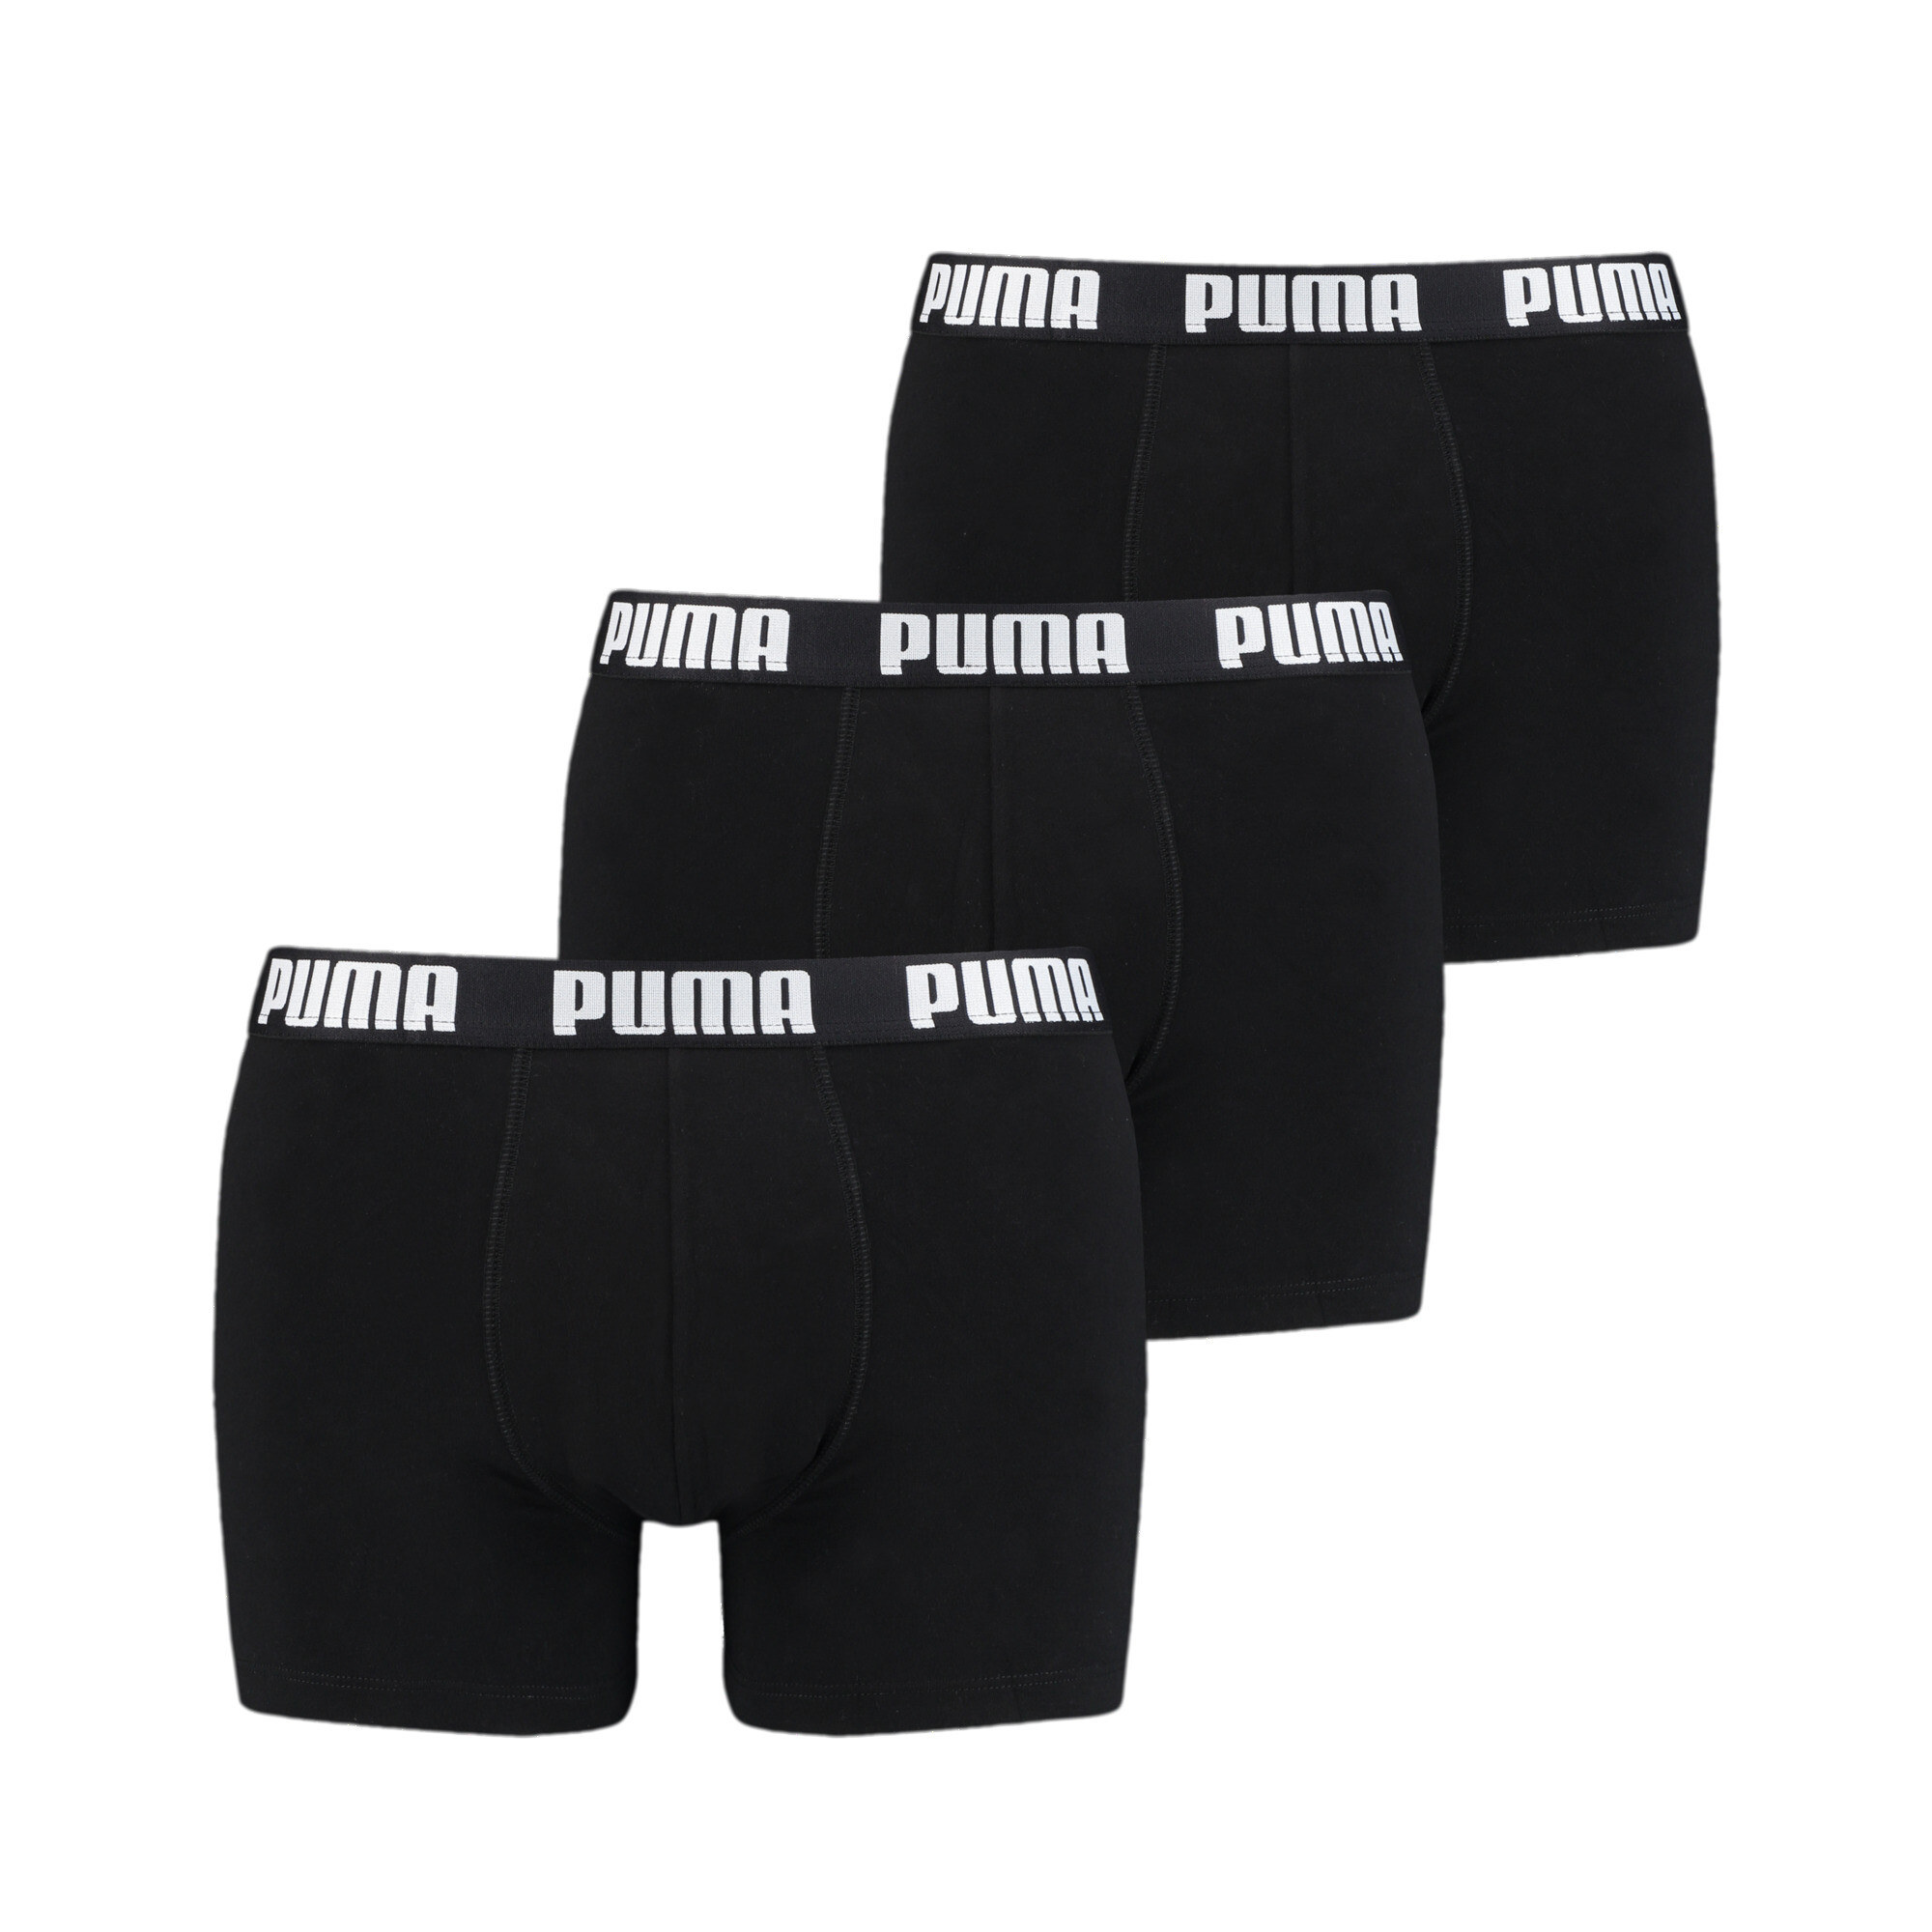 Men's PUMA Everyday Boxers 3 Pack In Black, Size Large